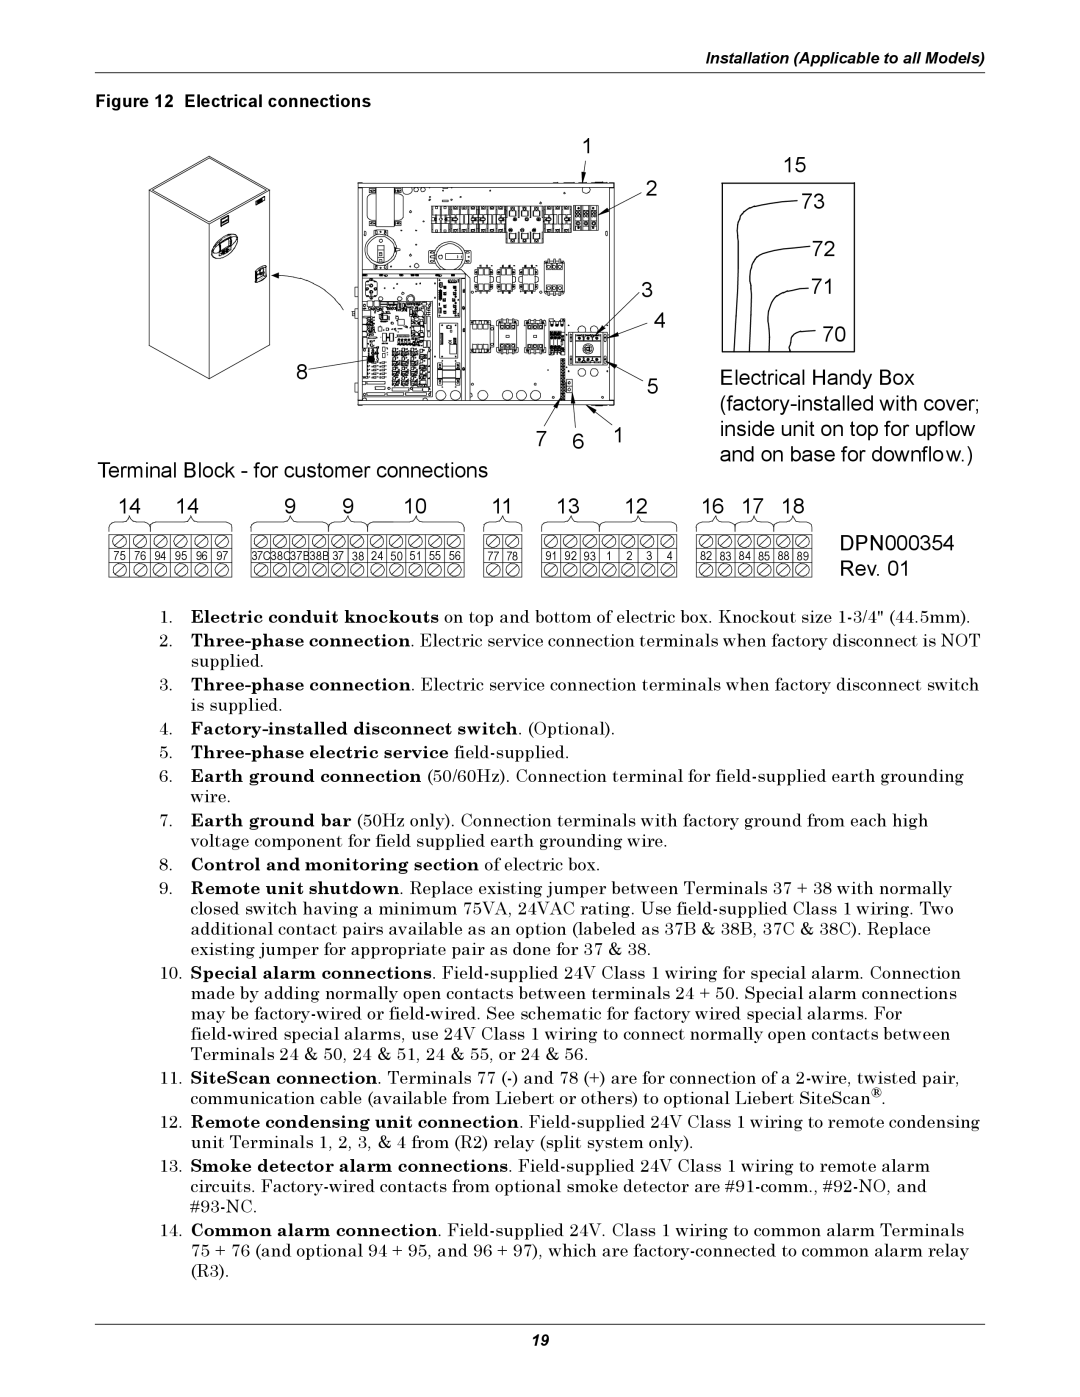 Emerson 3000 installation manual Terminal Block - for customer connections 